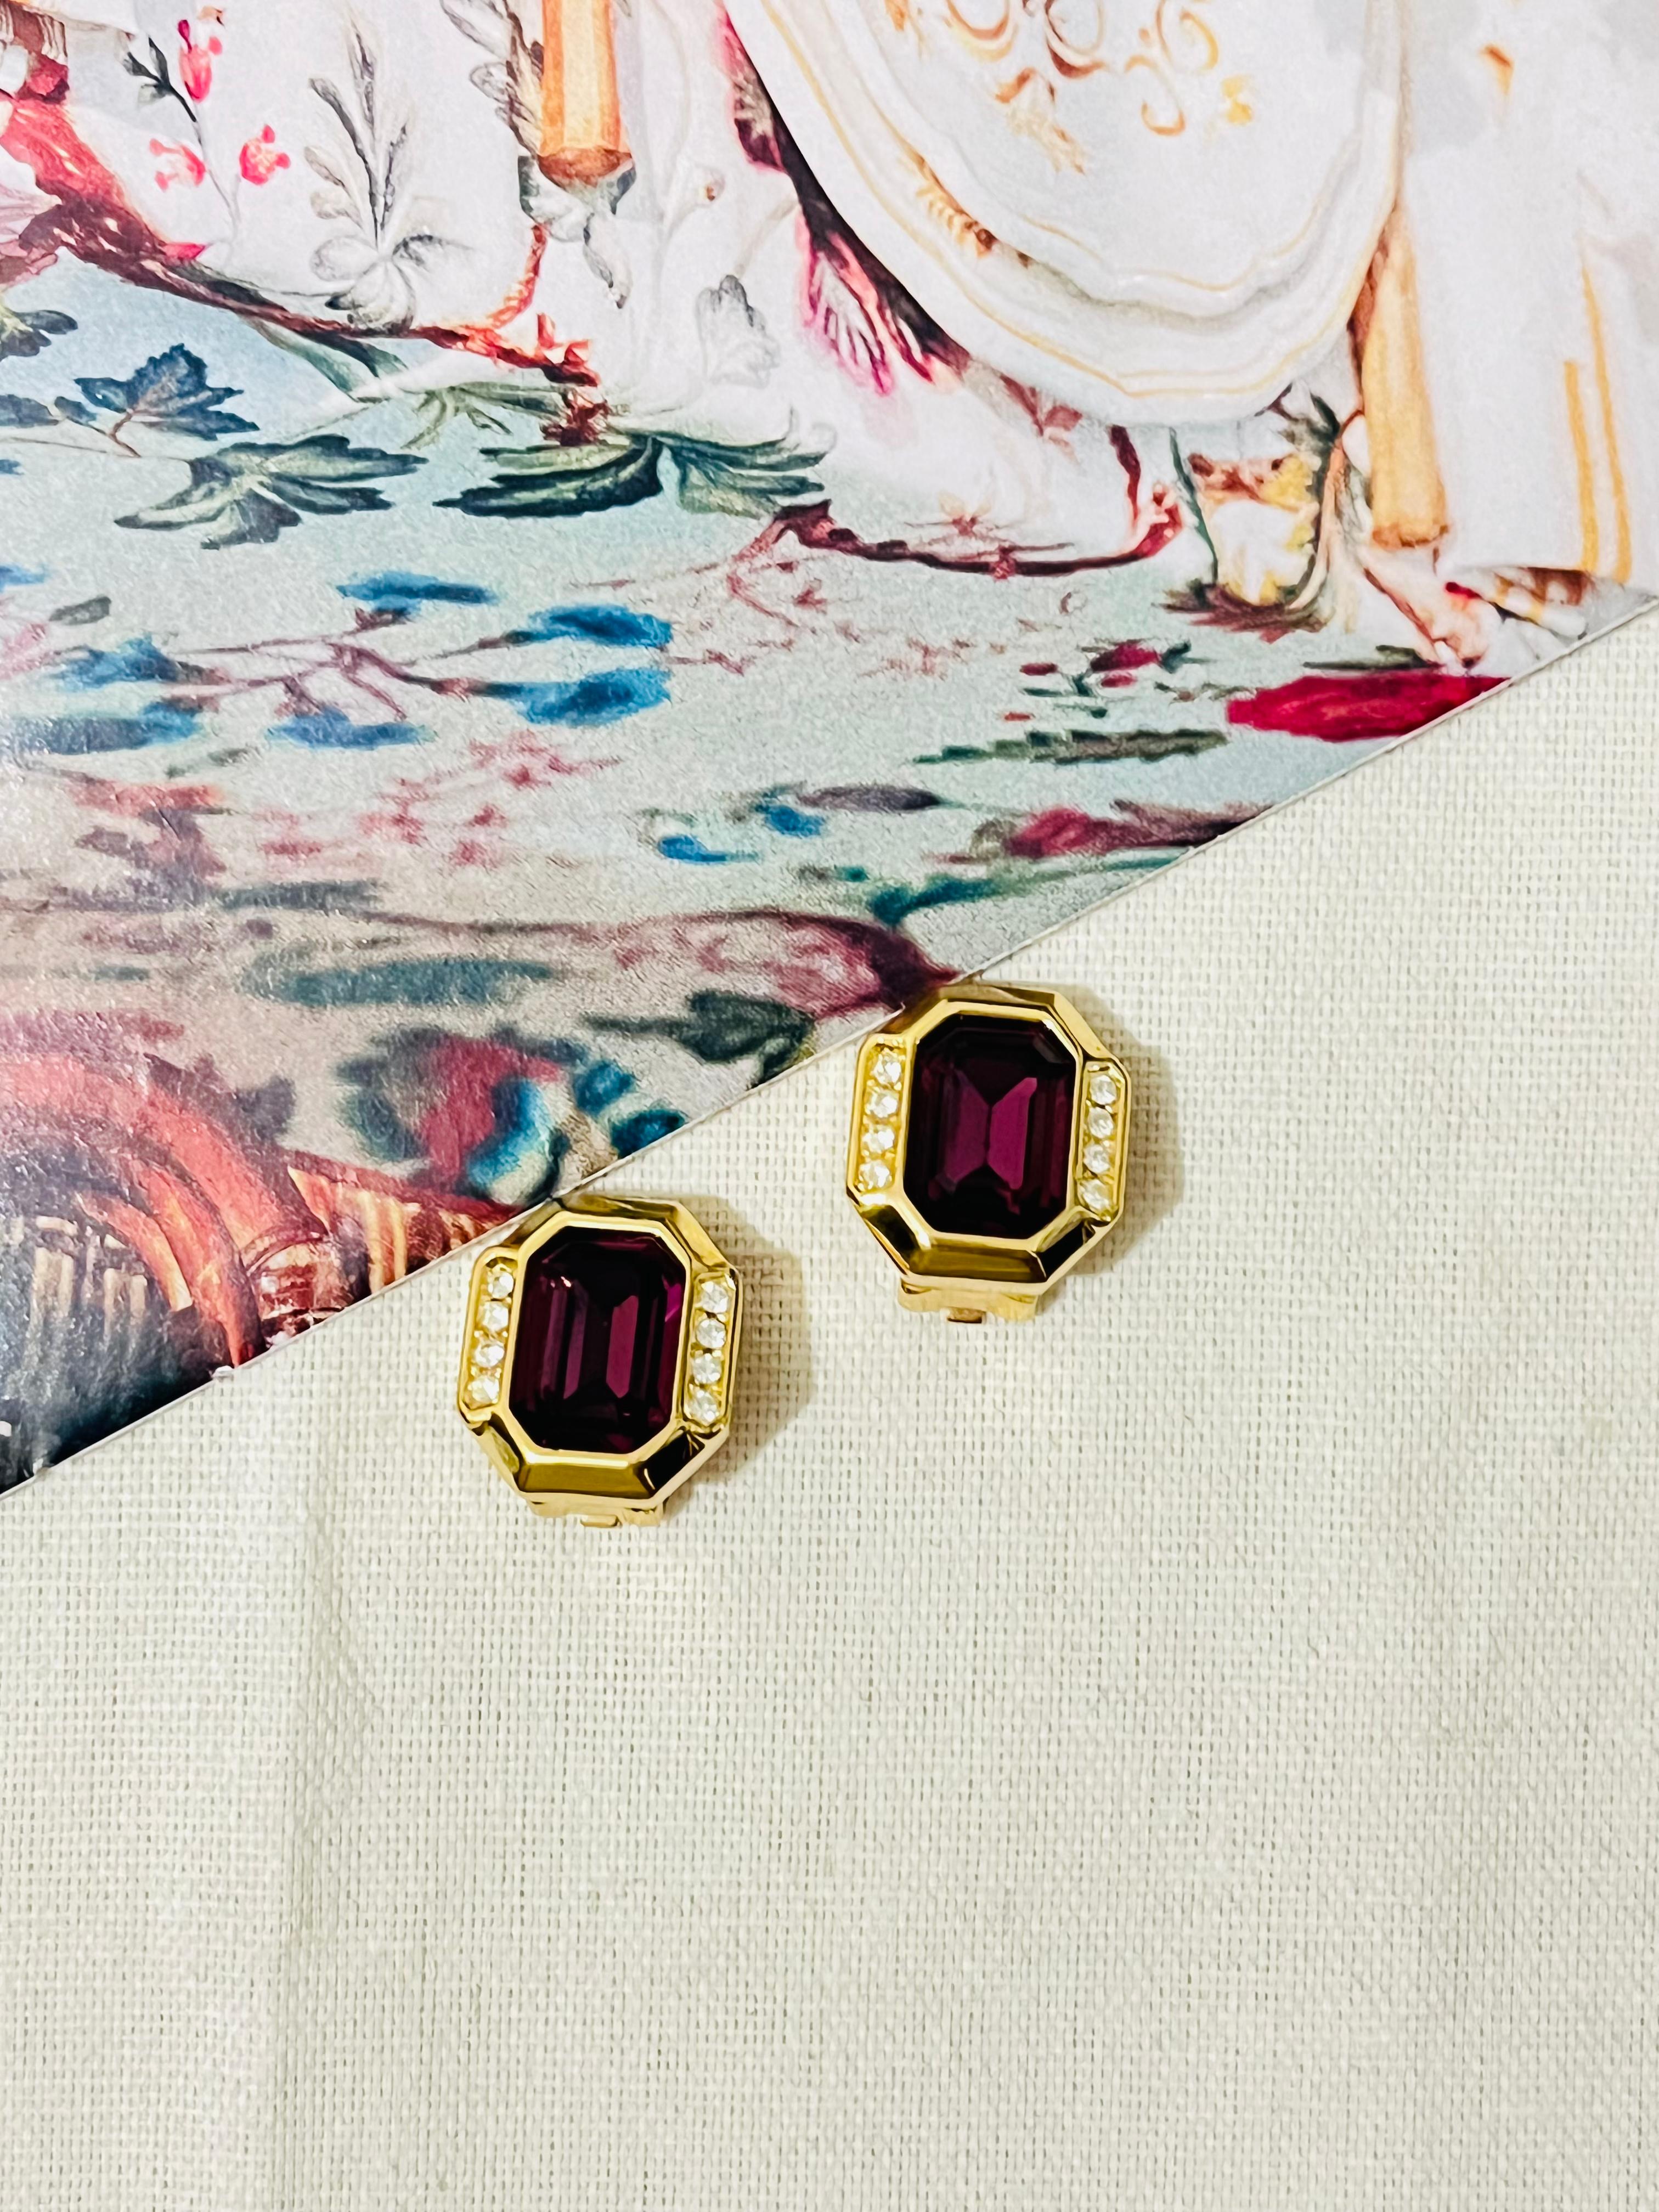 Christian Dior Vintage 1980s Amethyst Purple Crystals Octagonal Clip Earrings In Excellent Condition For Sale In Wokingham, England